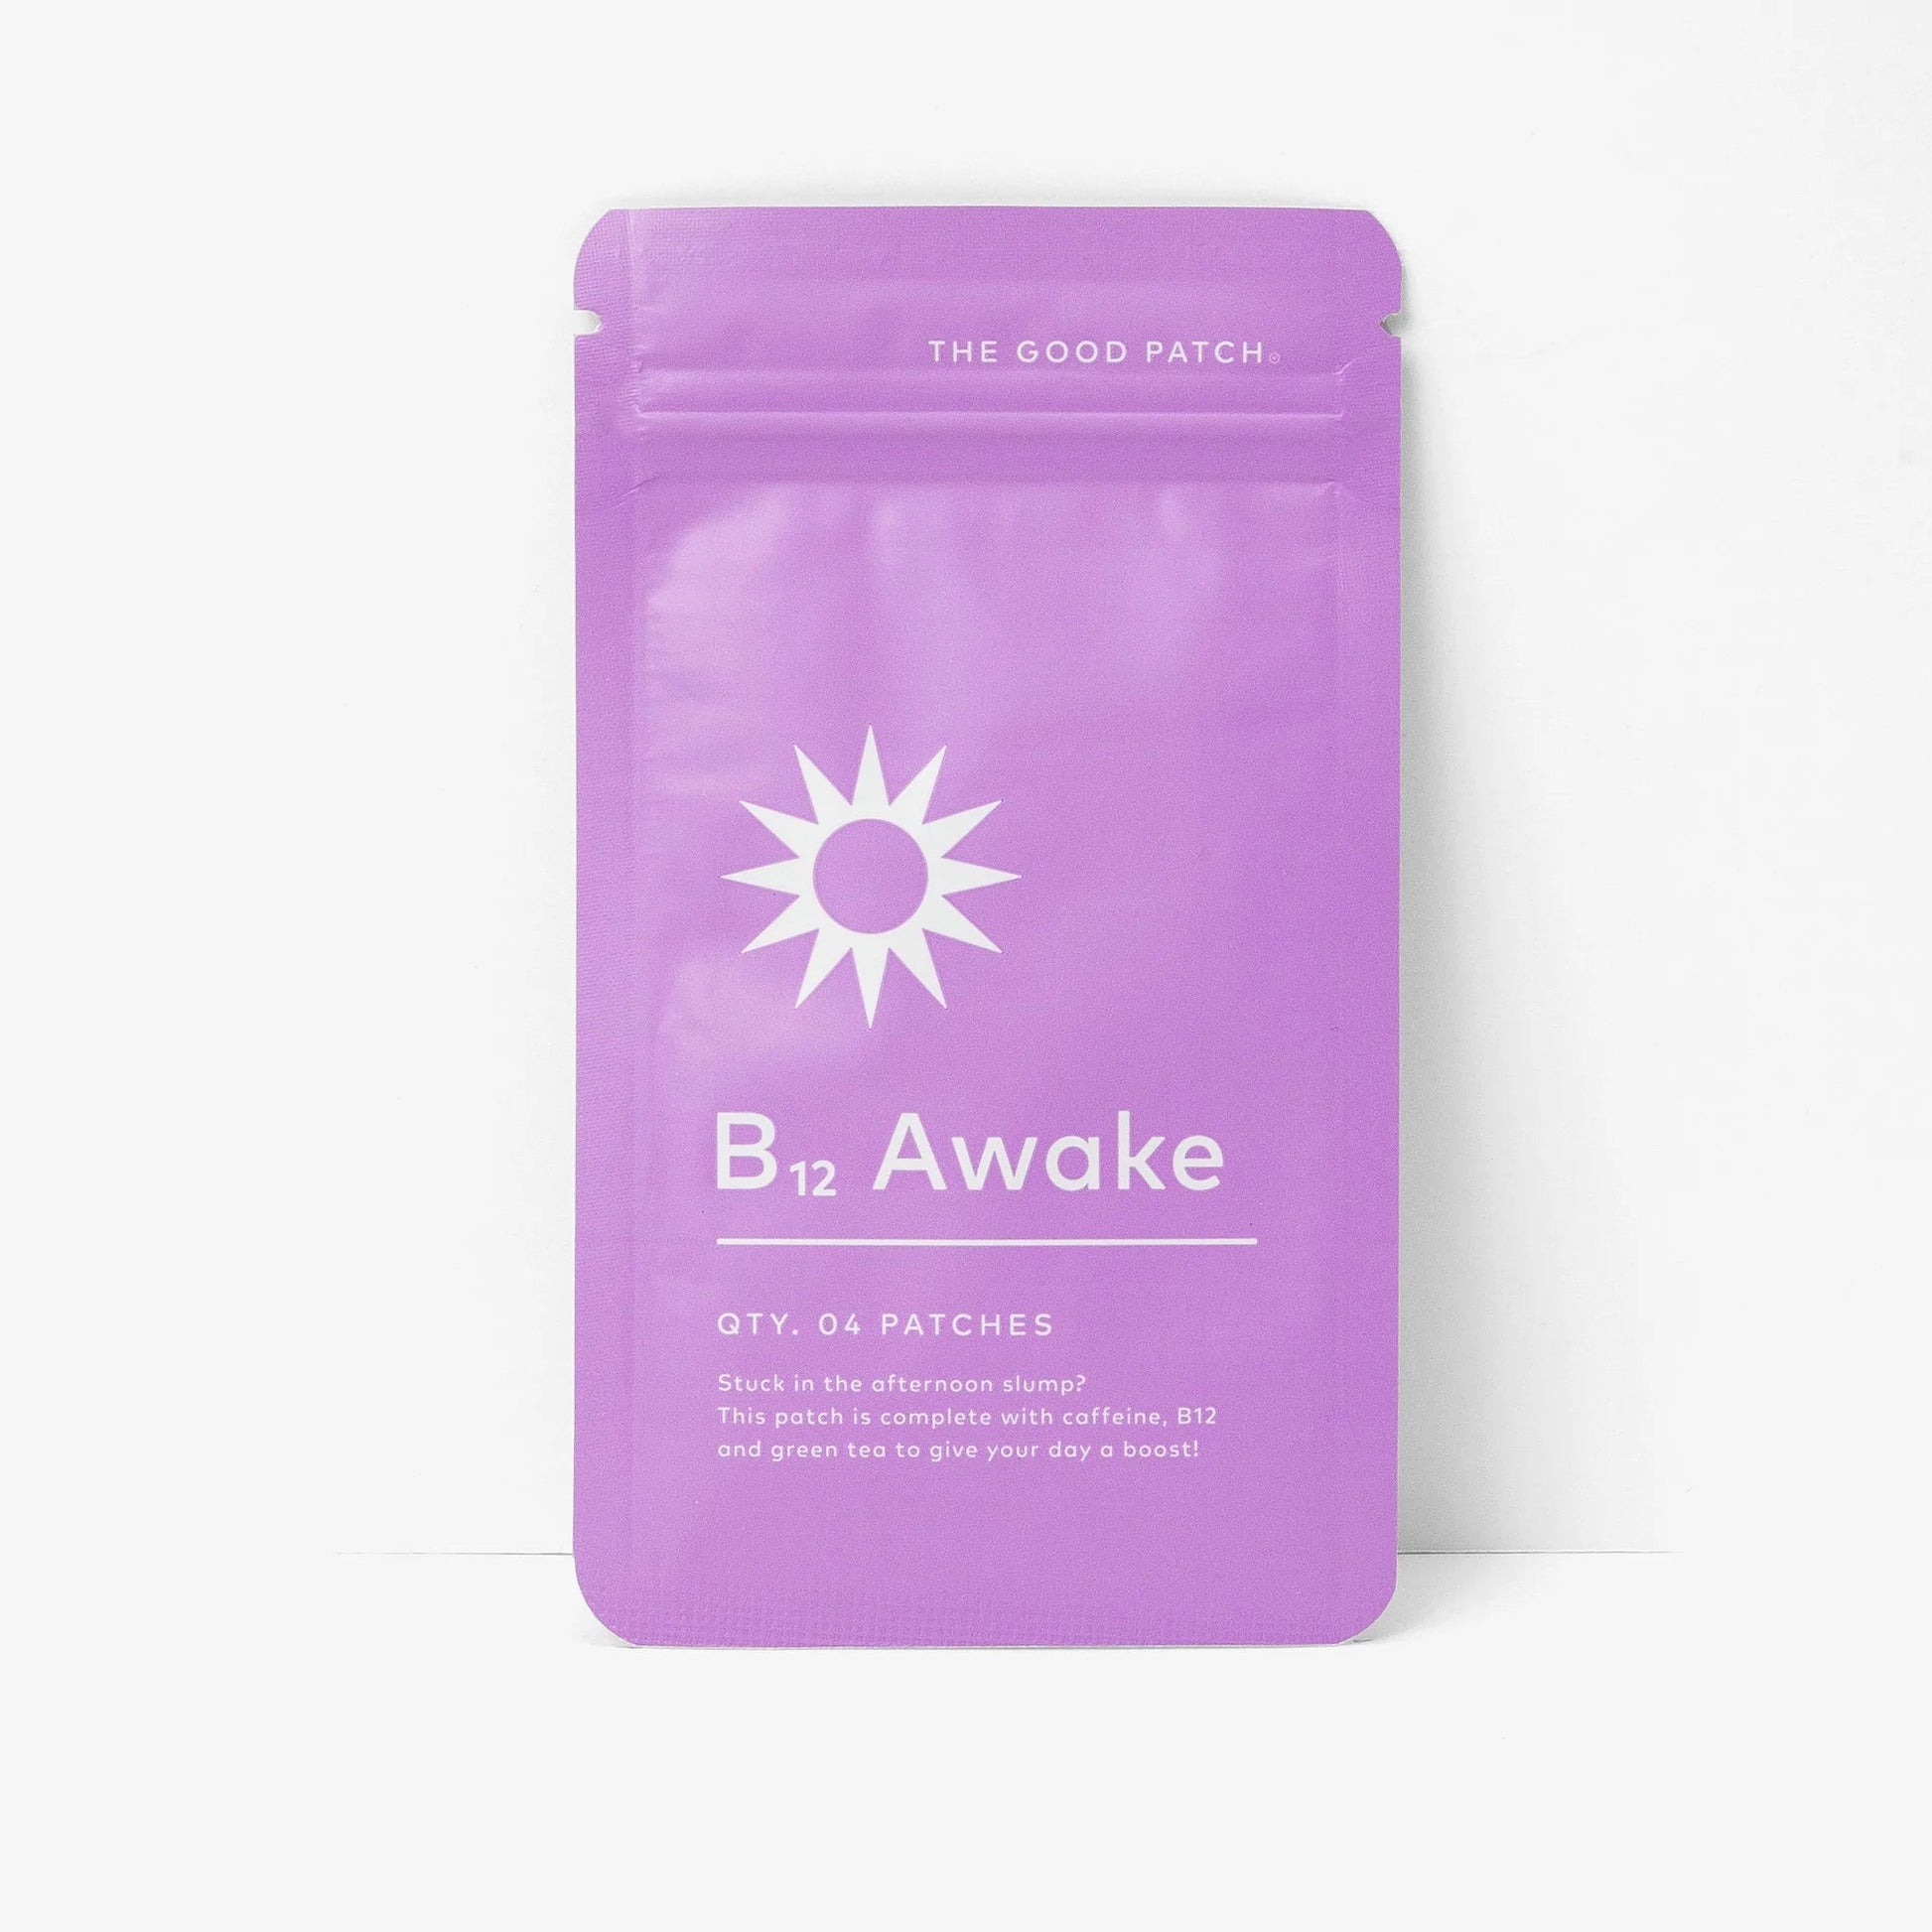 Buy Online Best B12 AWAKE | Buy innovative clinical skincare products - TOPBODY